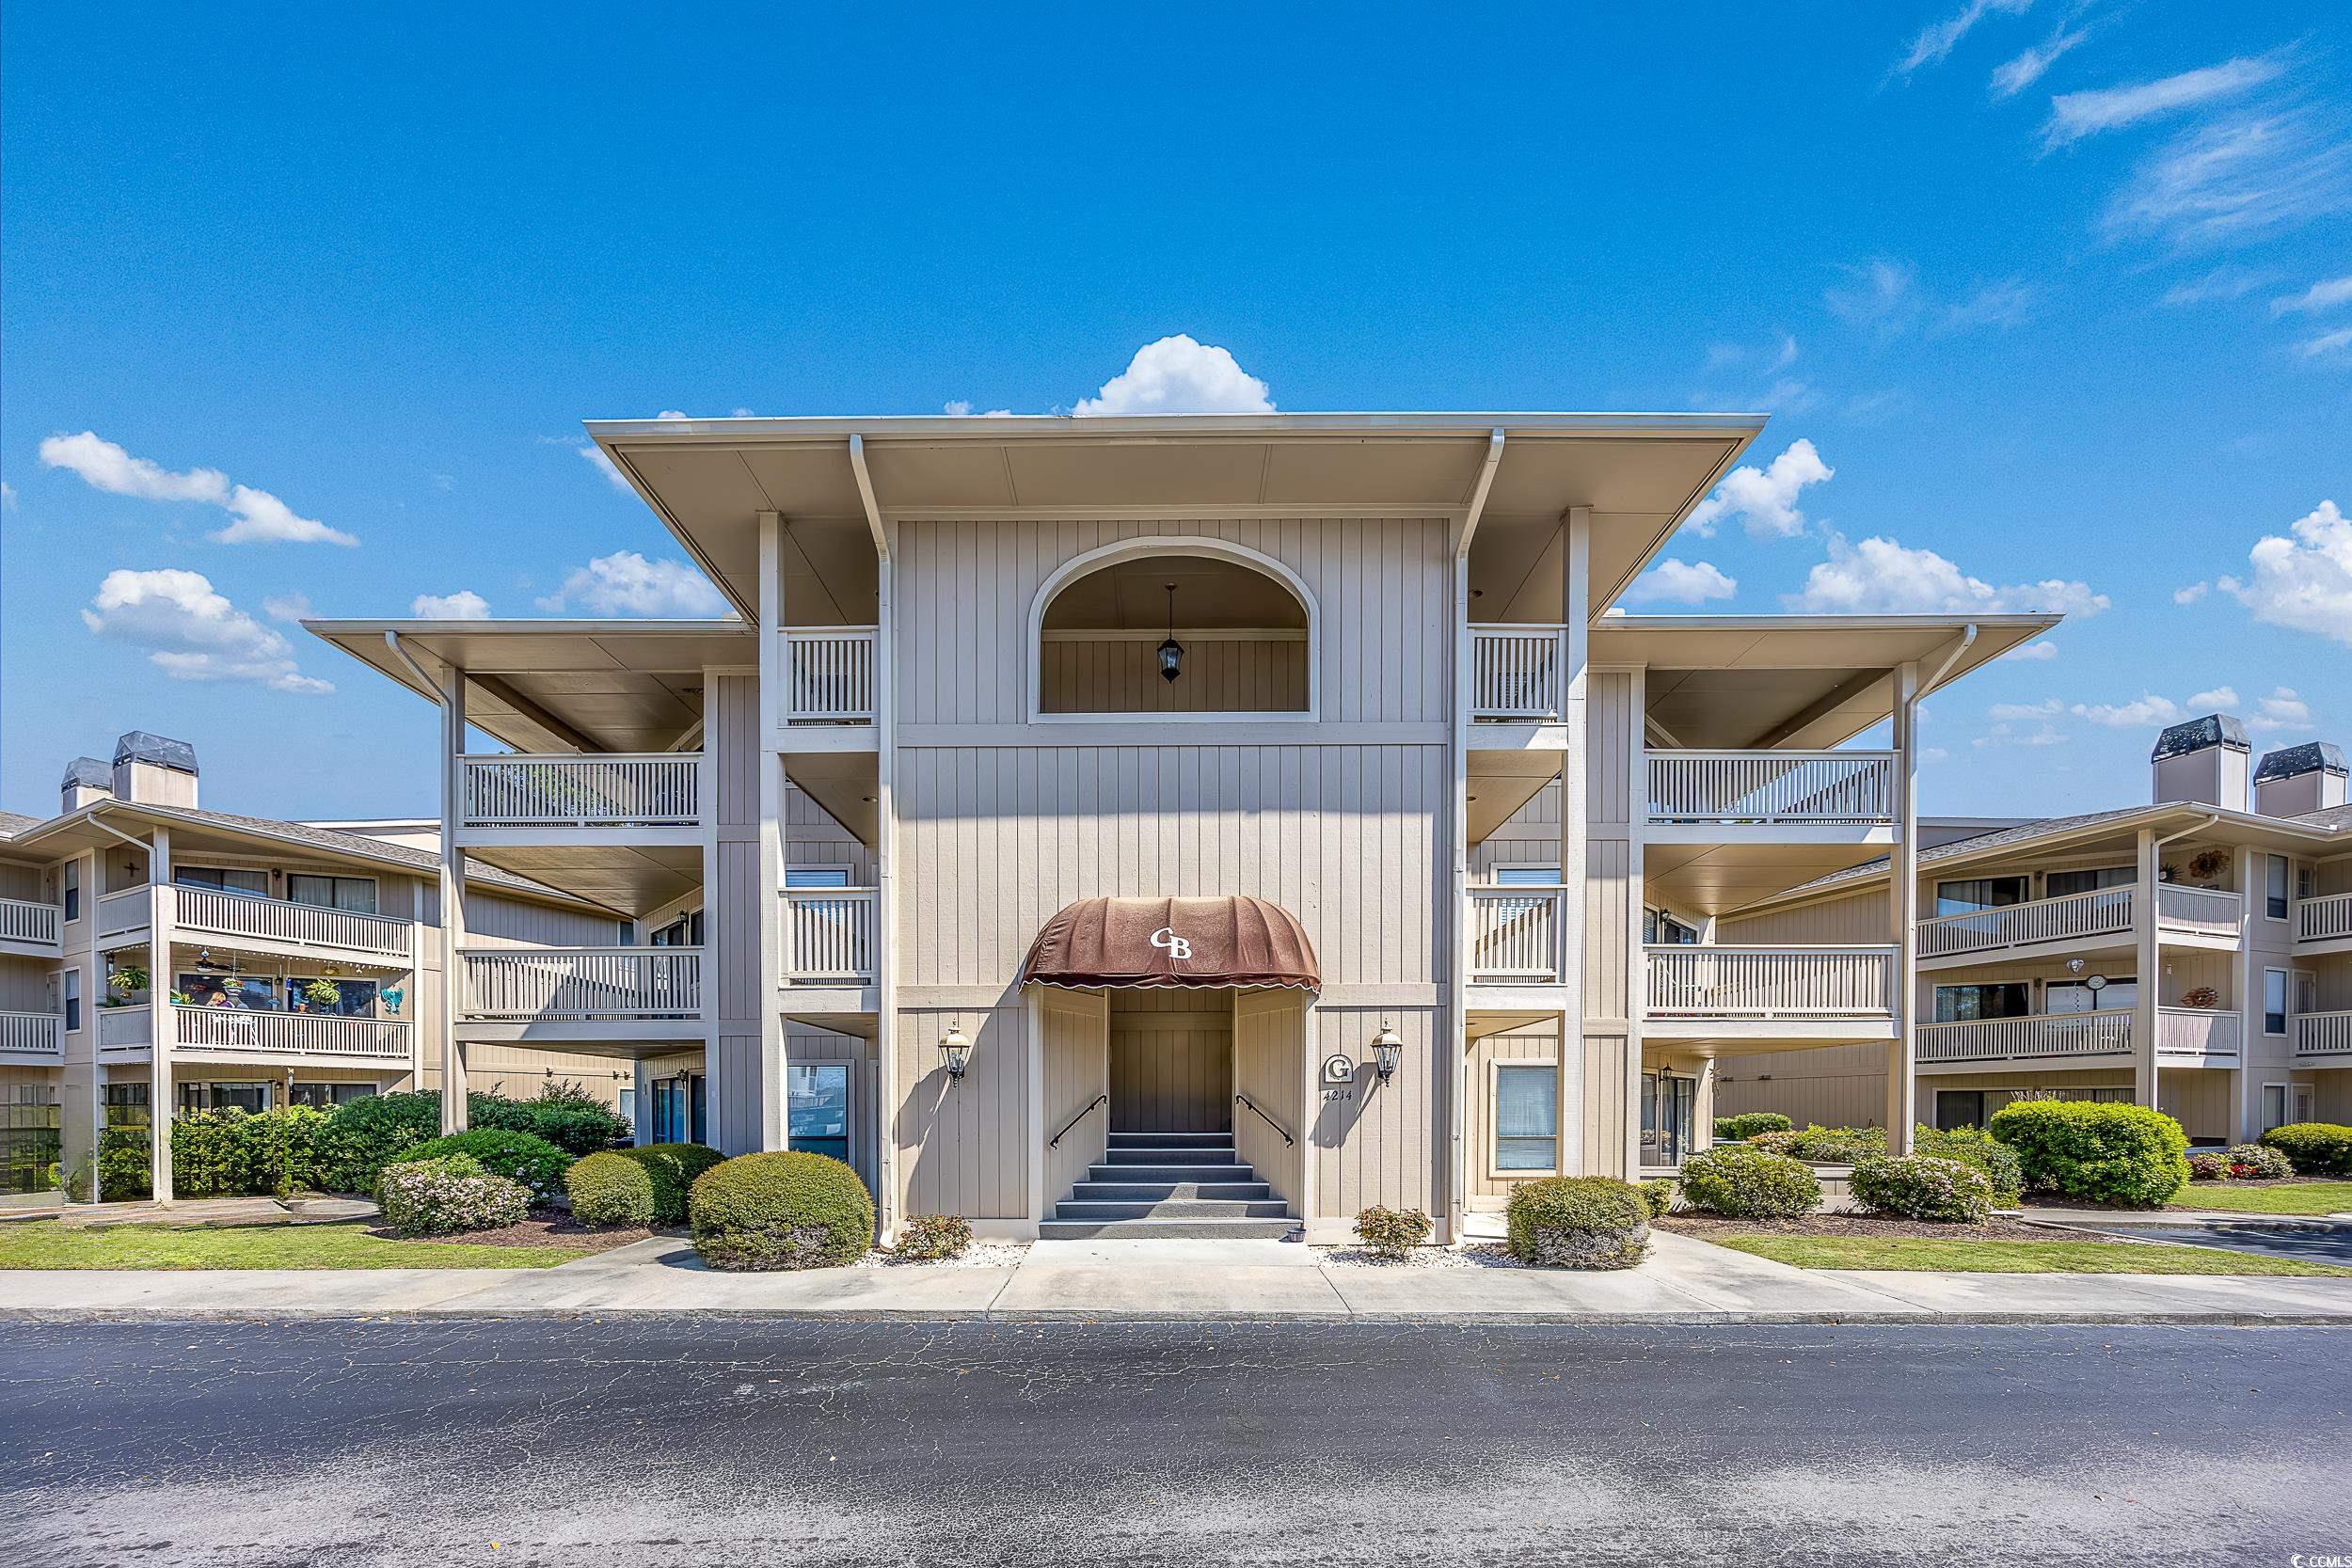 here's your opportunity to have your very own getaway at the beach or enjoy living year-round on the coast! located in the heart of little river, home of the "world famous blue crab festival" and intracoastal waterway dining and shops! larger unit features 2br/2ba end unit, wood burning brick corner fireplace, 2 spacious balconies, 2 exterior storage closets and private entry into the unit. beautiful wood flooring in the living area and hallway and both bedrooms have private bathrooms.  the kitchen offers generous cabinet space and a breakfast bar, granite countertops, and stainless steel appliances. pick which beach for the day as this property is so close to sunset beach, nc or cherry grove-north myrtle beach! when you are back from the beach you can take a dip in the community pool just steps from the unit or grab your racket for some tennis action. so much to do and see so come preview this property soon!